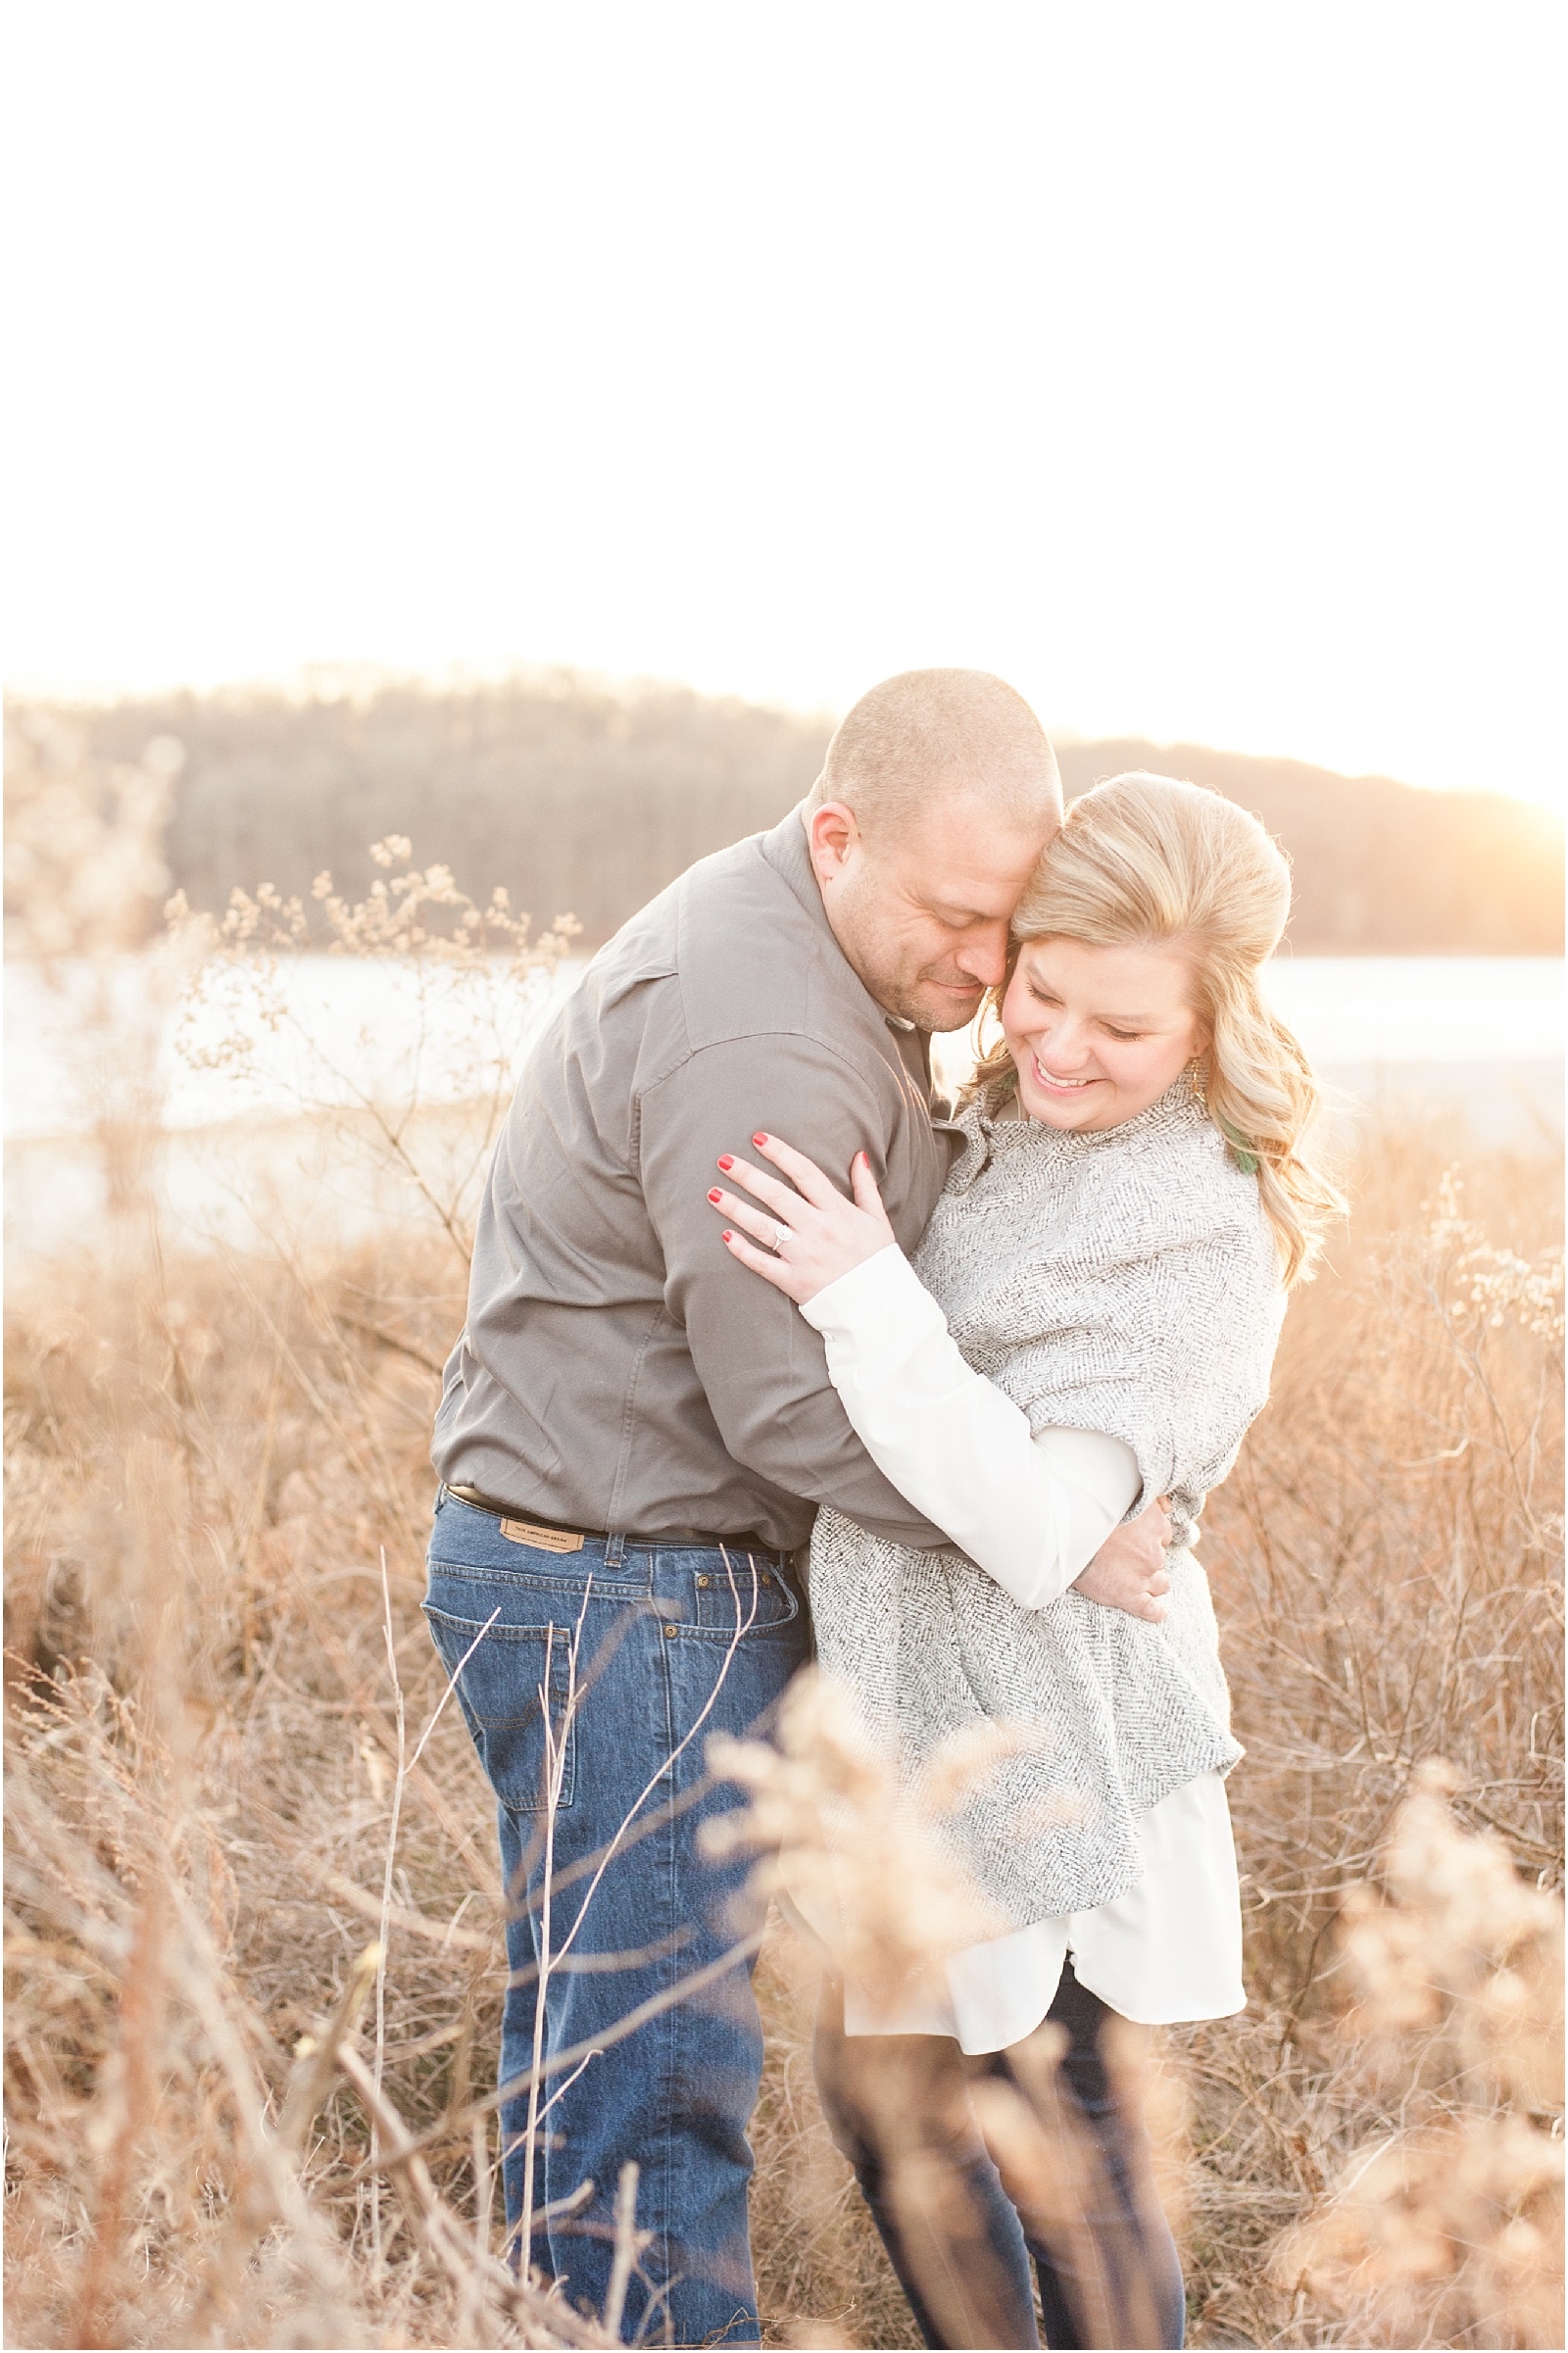 Jaclyn and Chris | Engaged-54.jpg